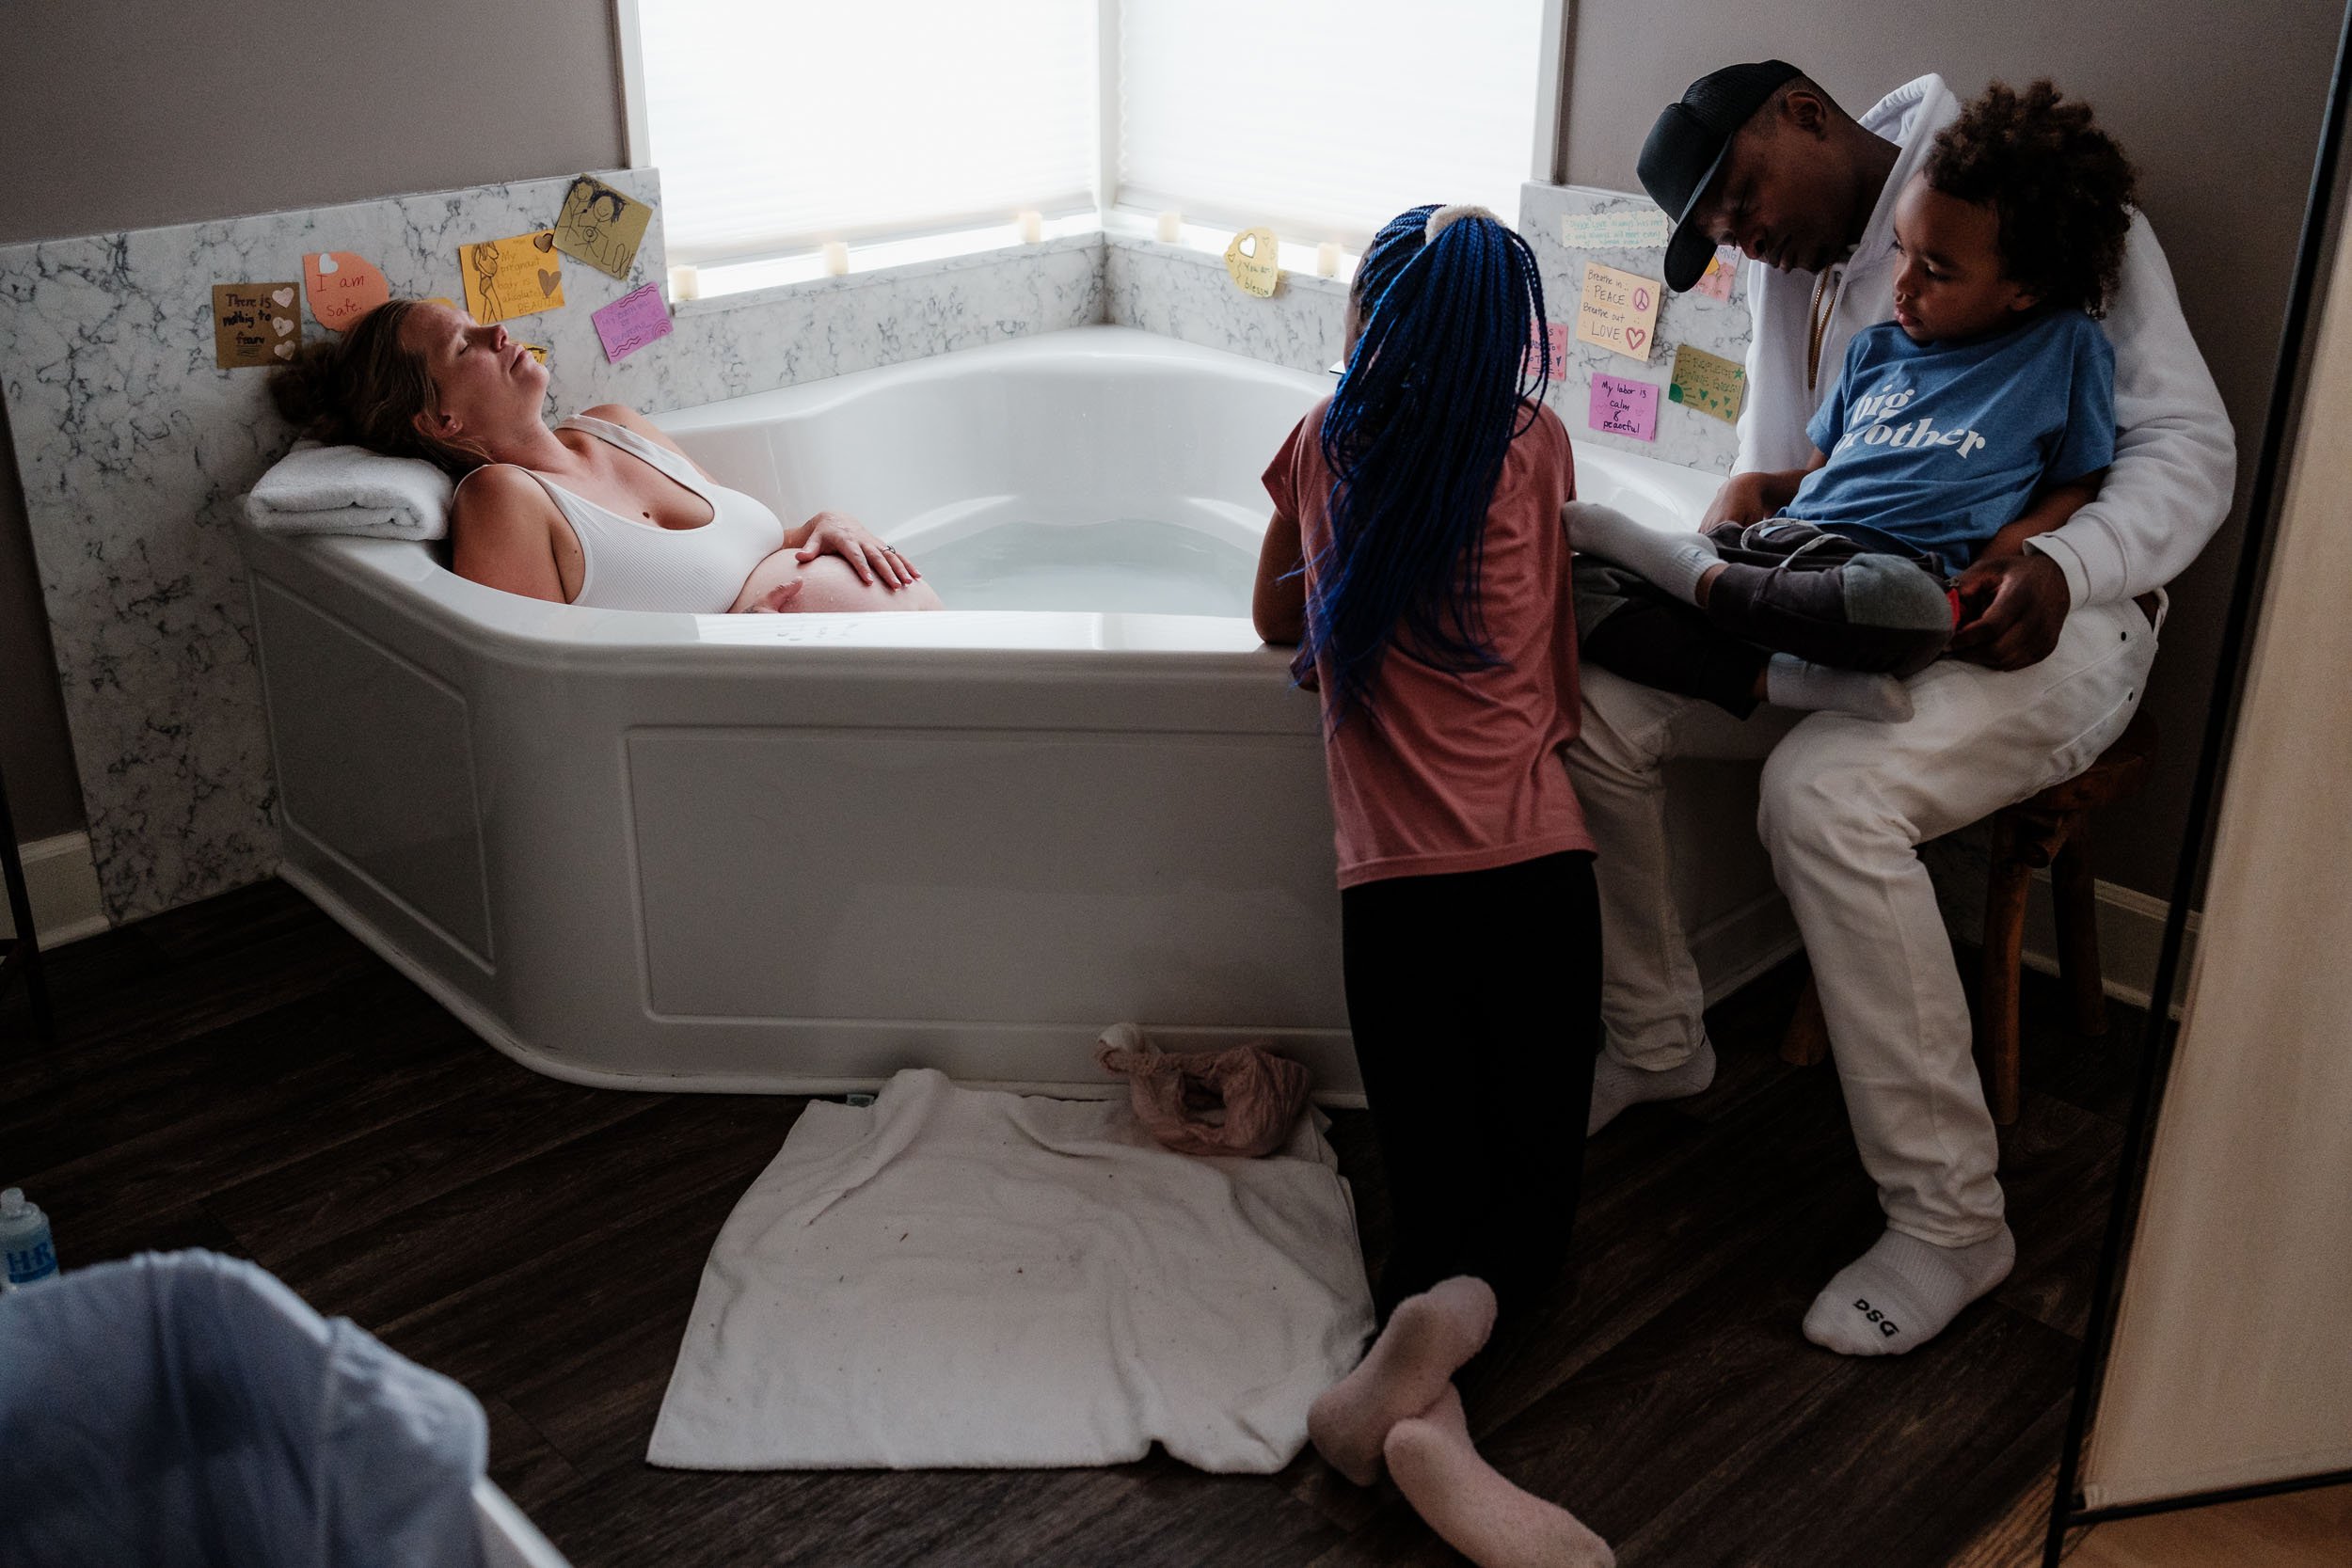 A family gathers round a birth tub as a mother labors.